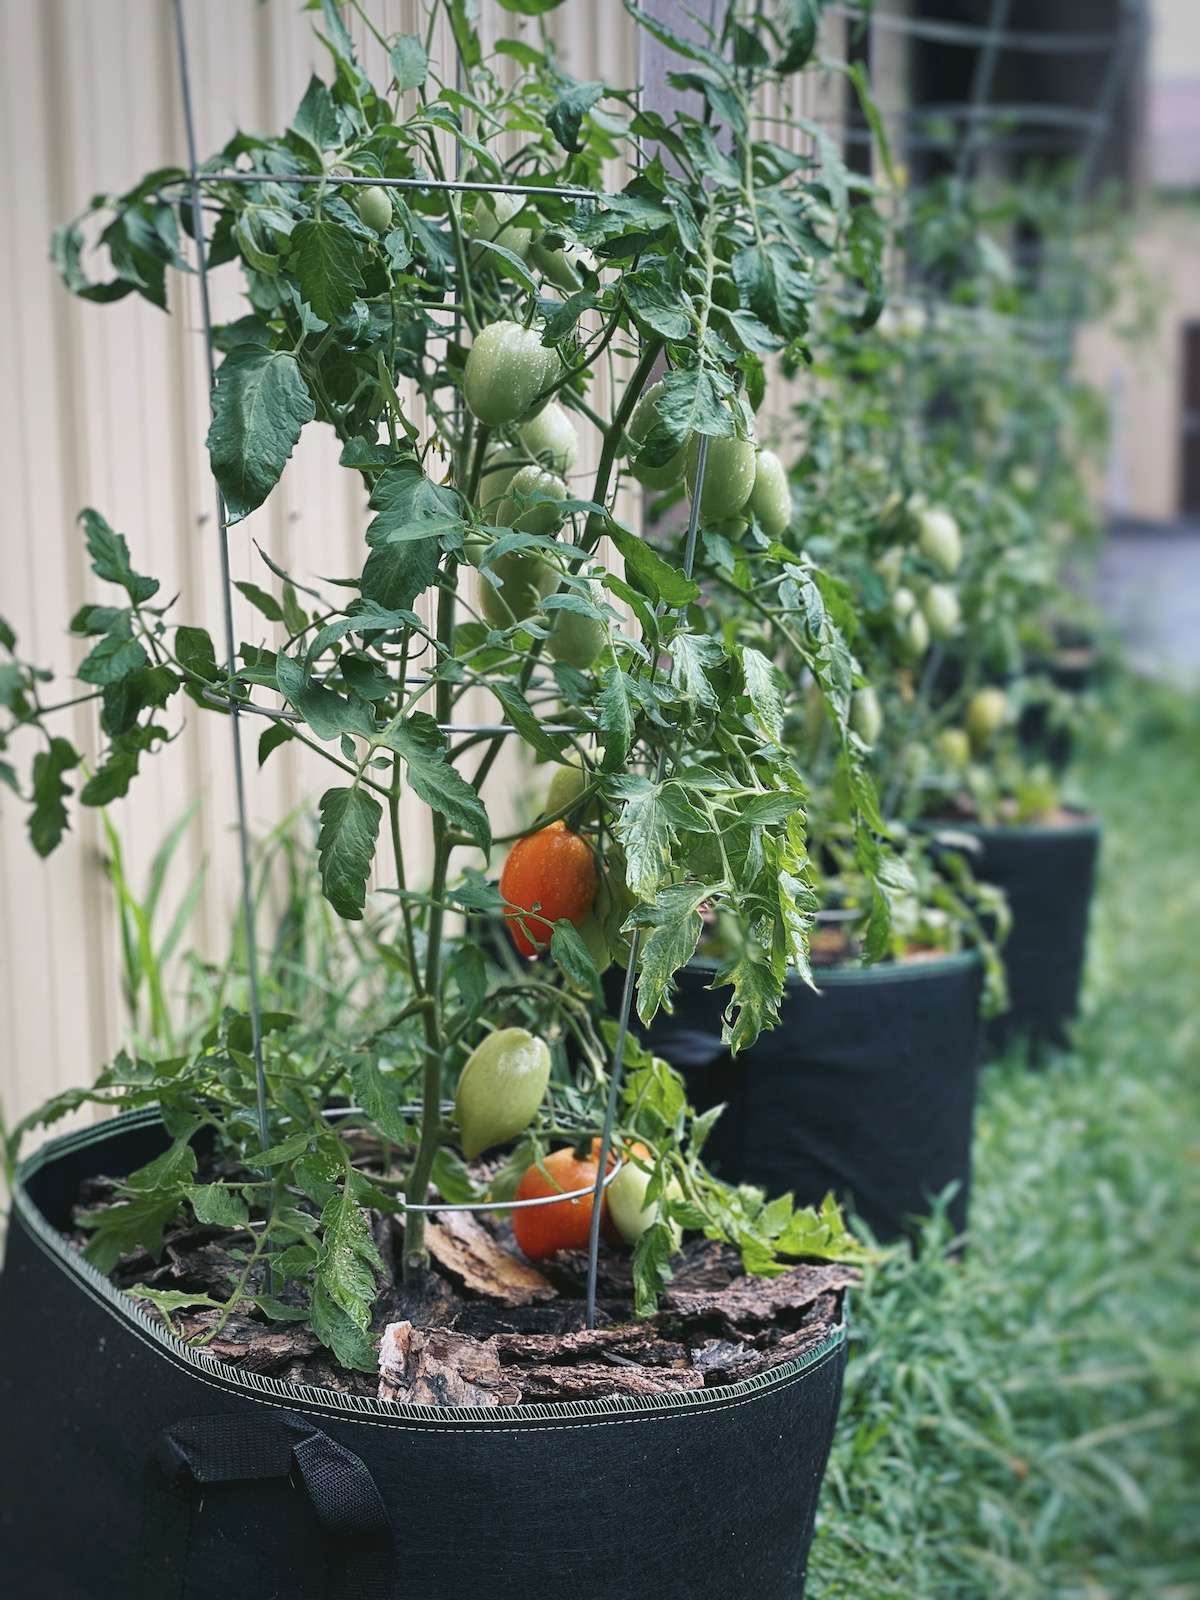 3 tomato plants in a row along a building. Planted in black grow bags.